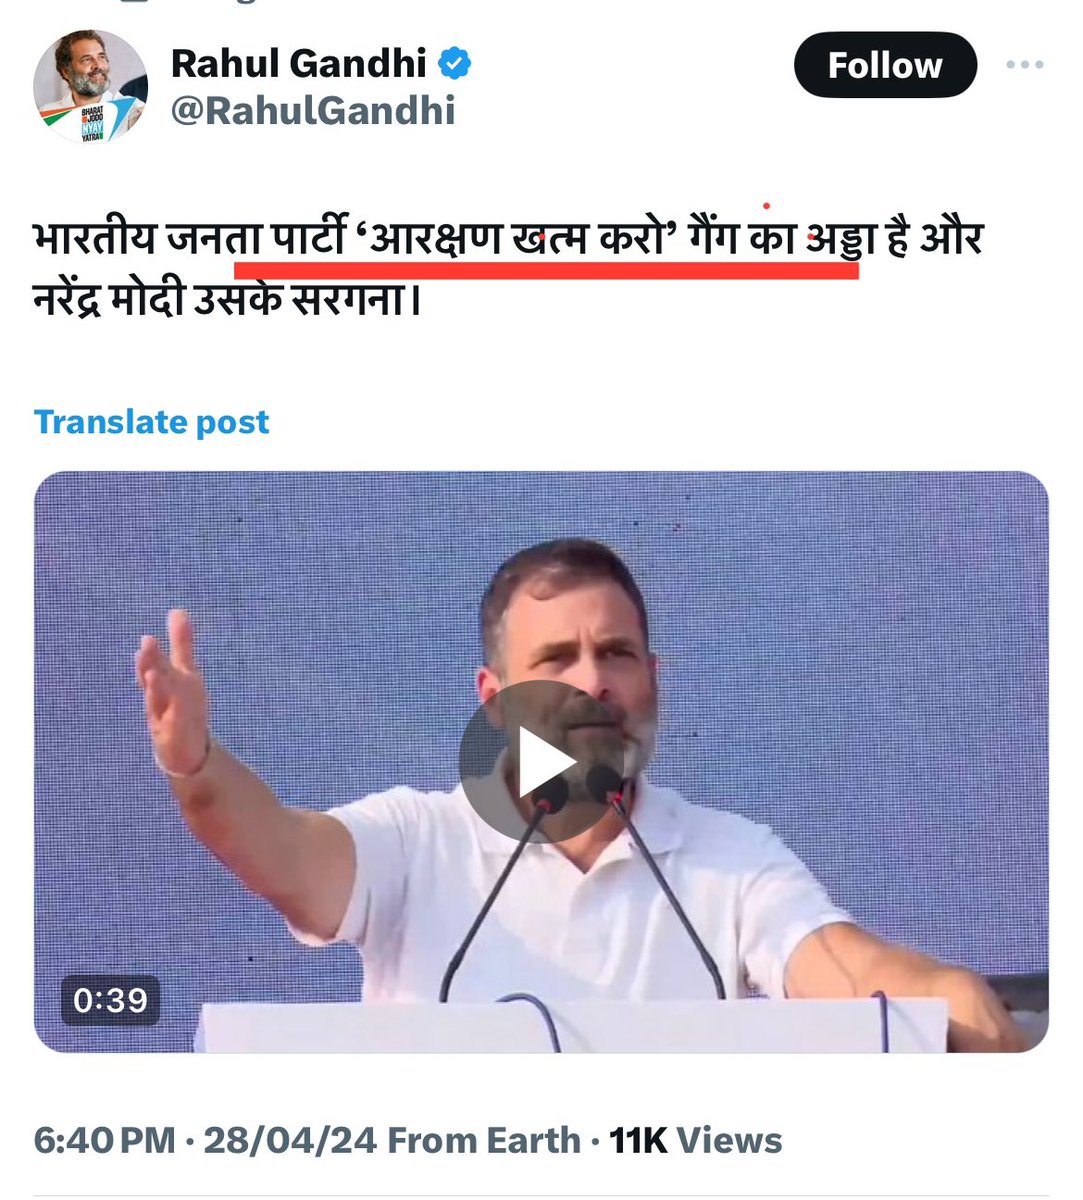 Many troll accounts were sharing edited videos of Amit Shah. It looks like it's a plan of the top leadership of Congress to spread fake news as much as possible. People like Dhruv Rathi won't consider this fake news!